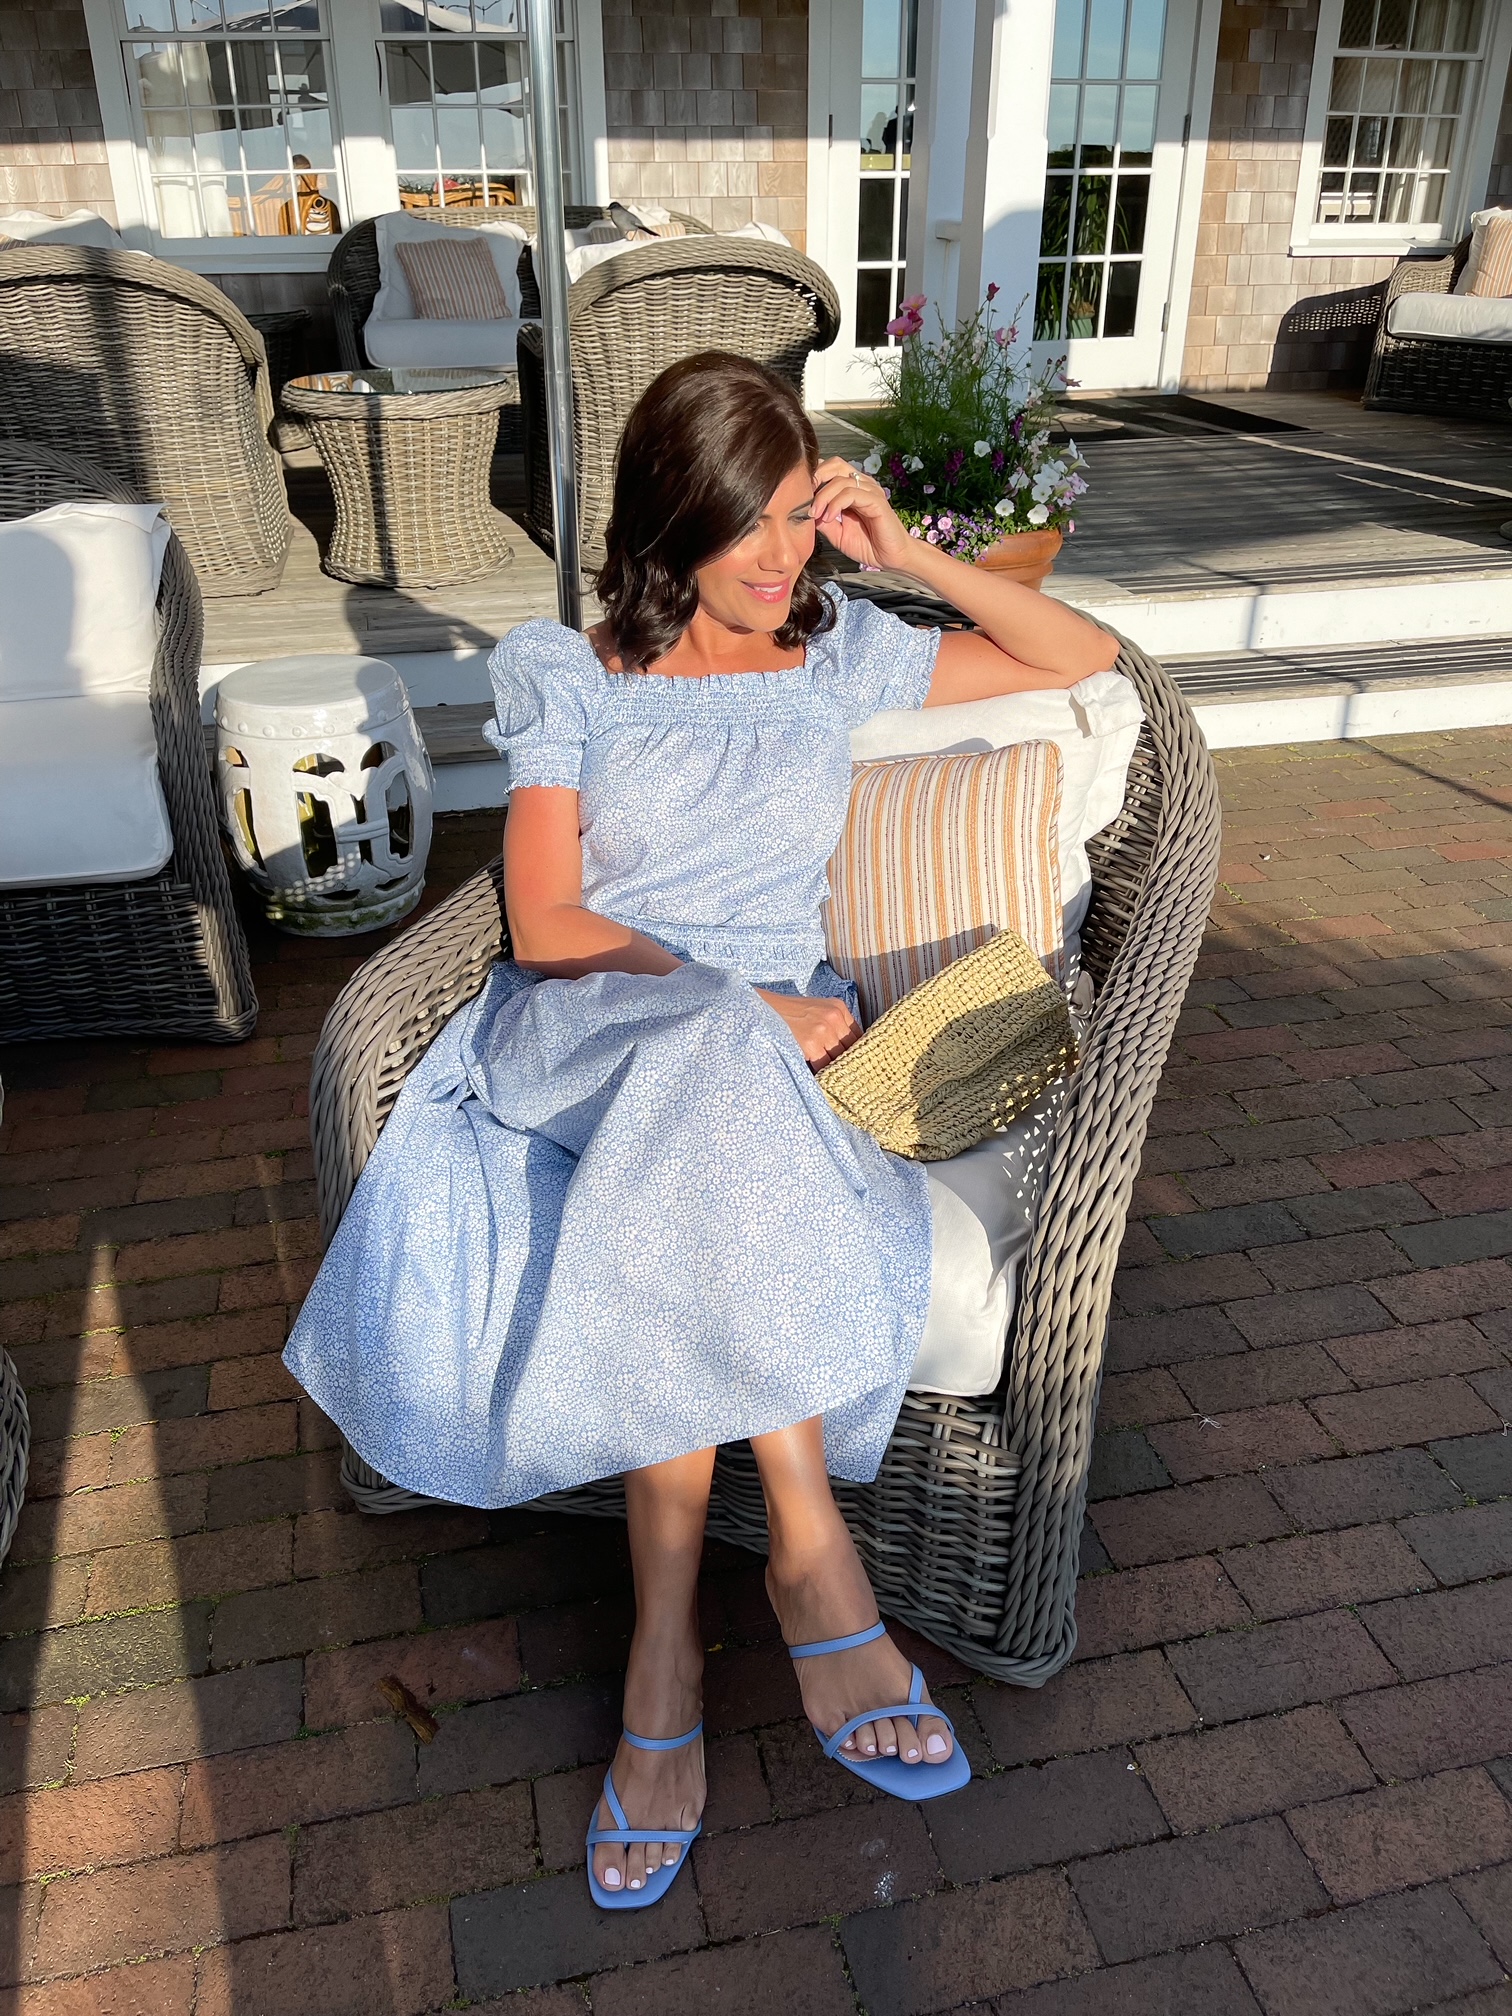 Desiree Leone wearing J.Crew Liberty Blossom print top and skirt in Nantucket